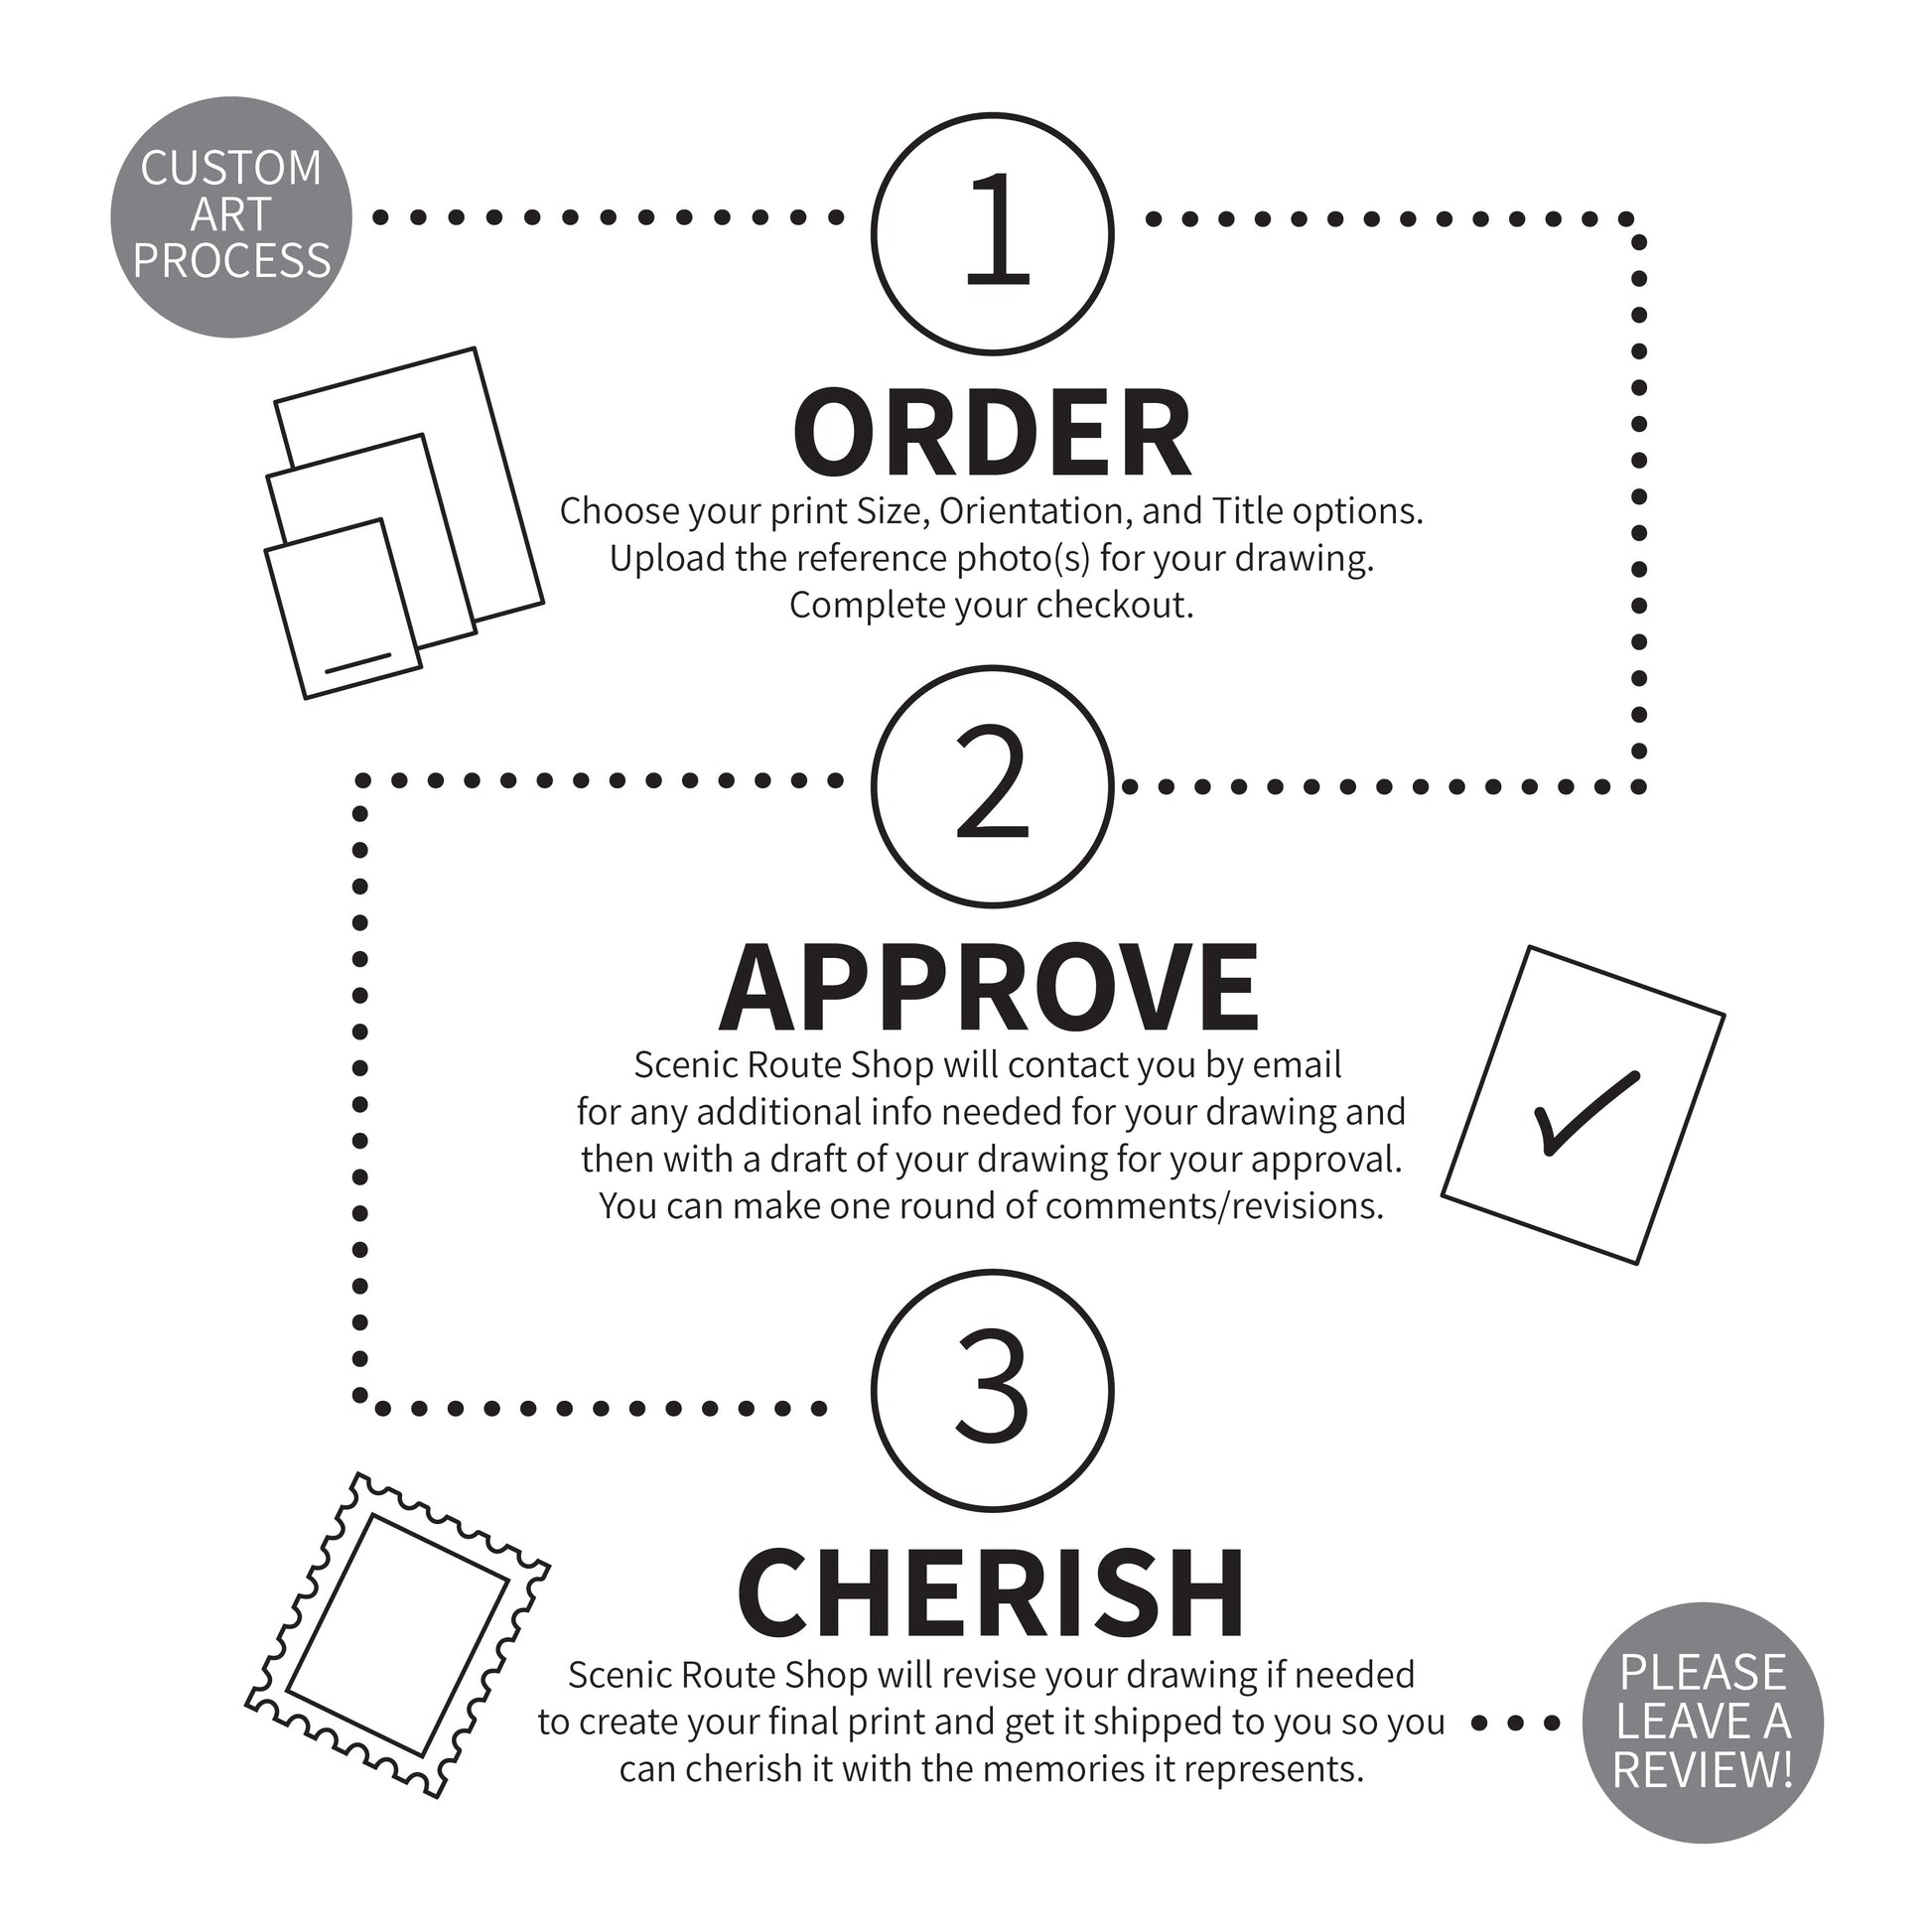 A diagram of the custom order process for the Scenic Route Shop